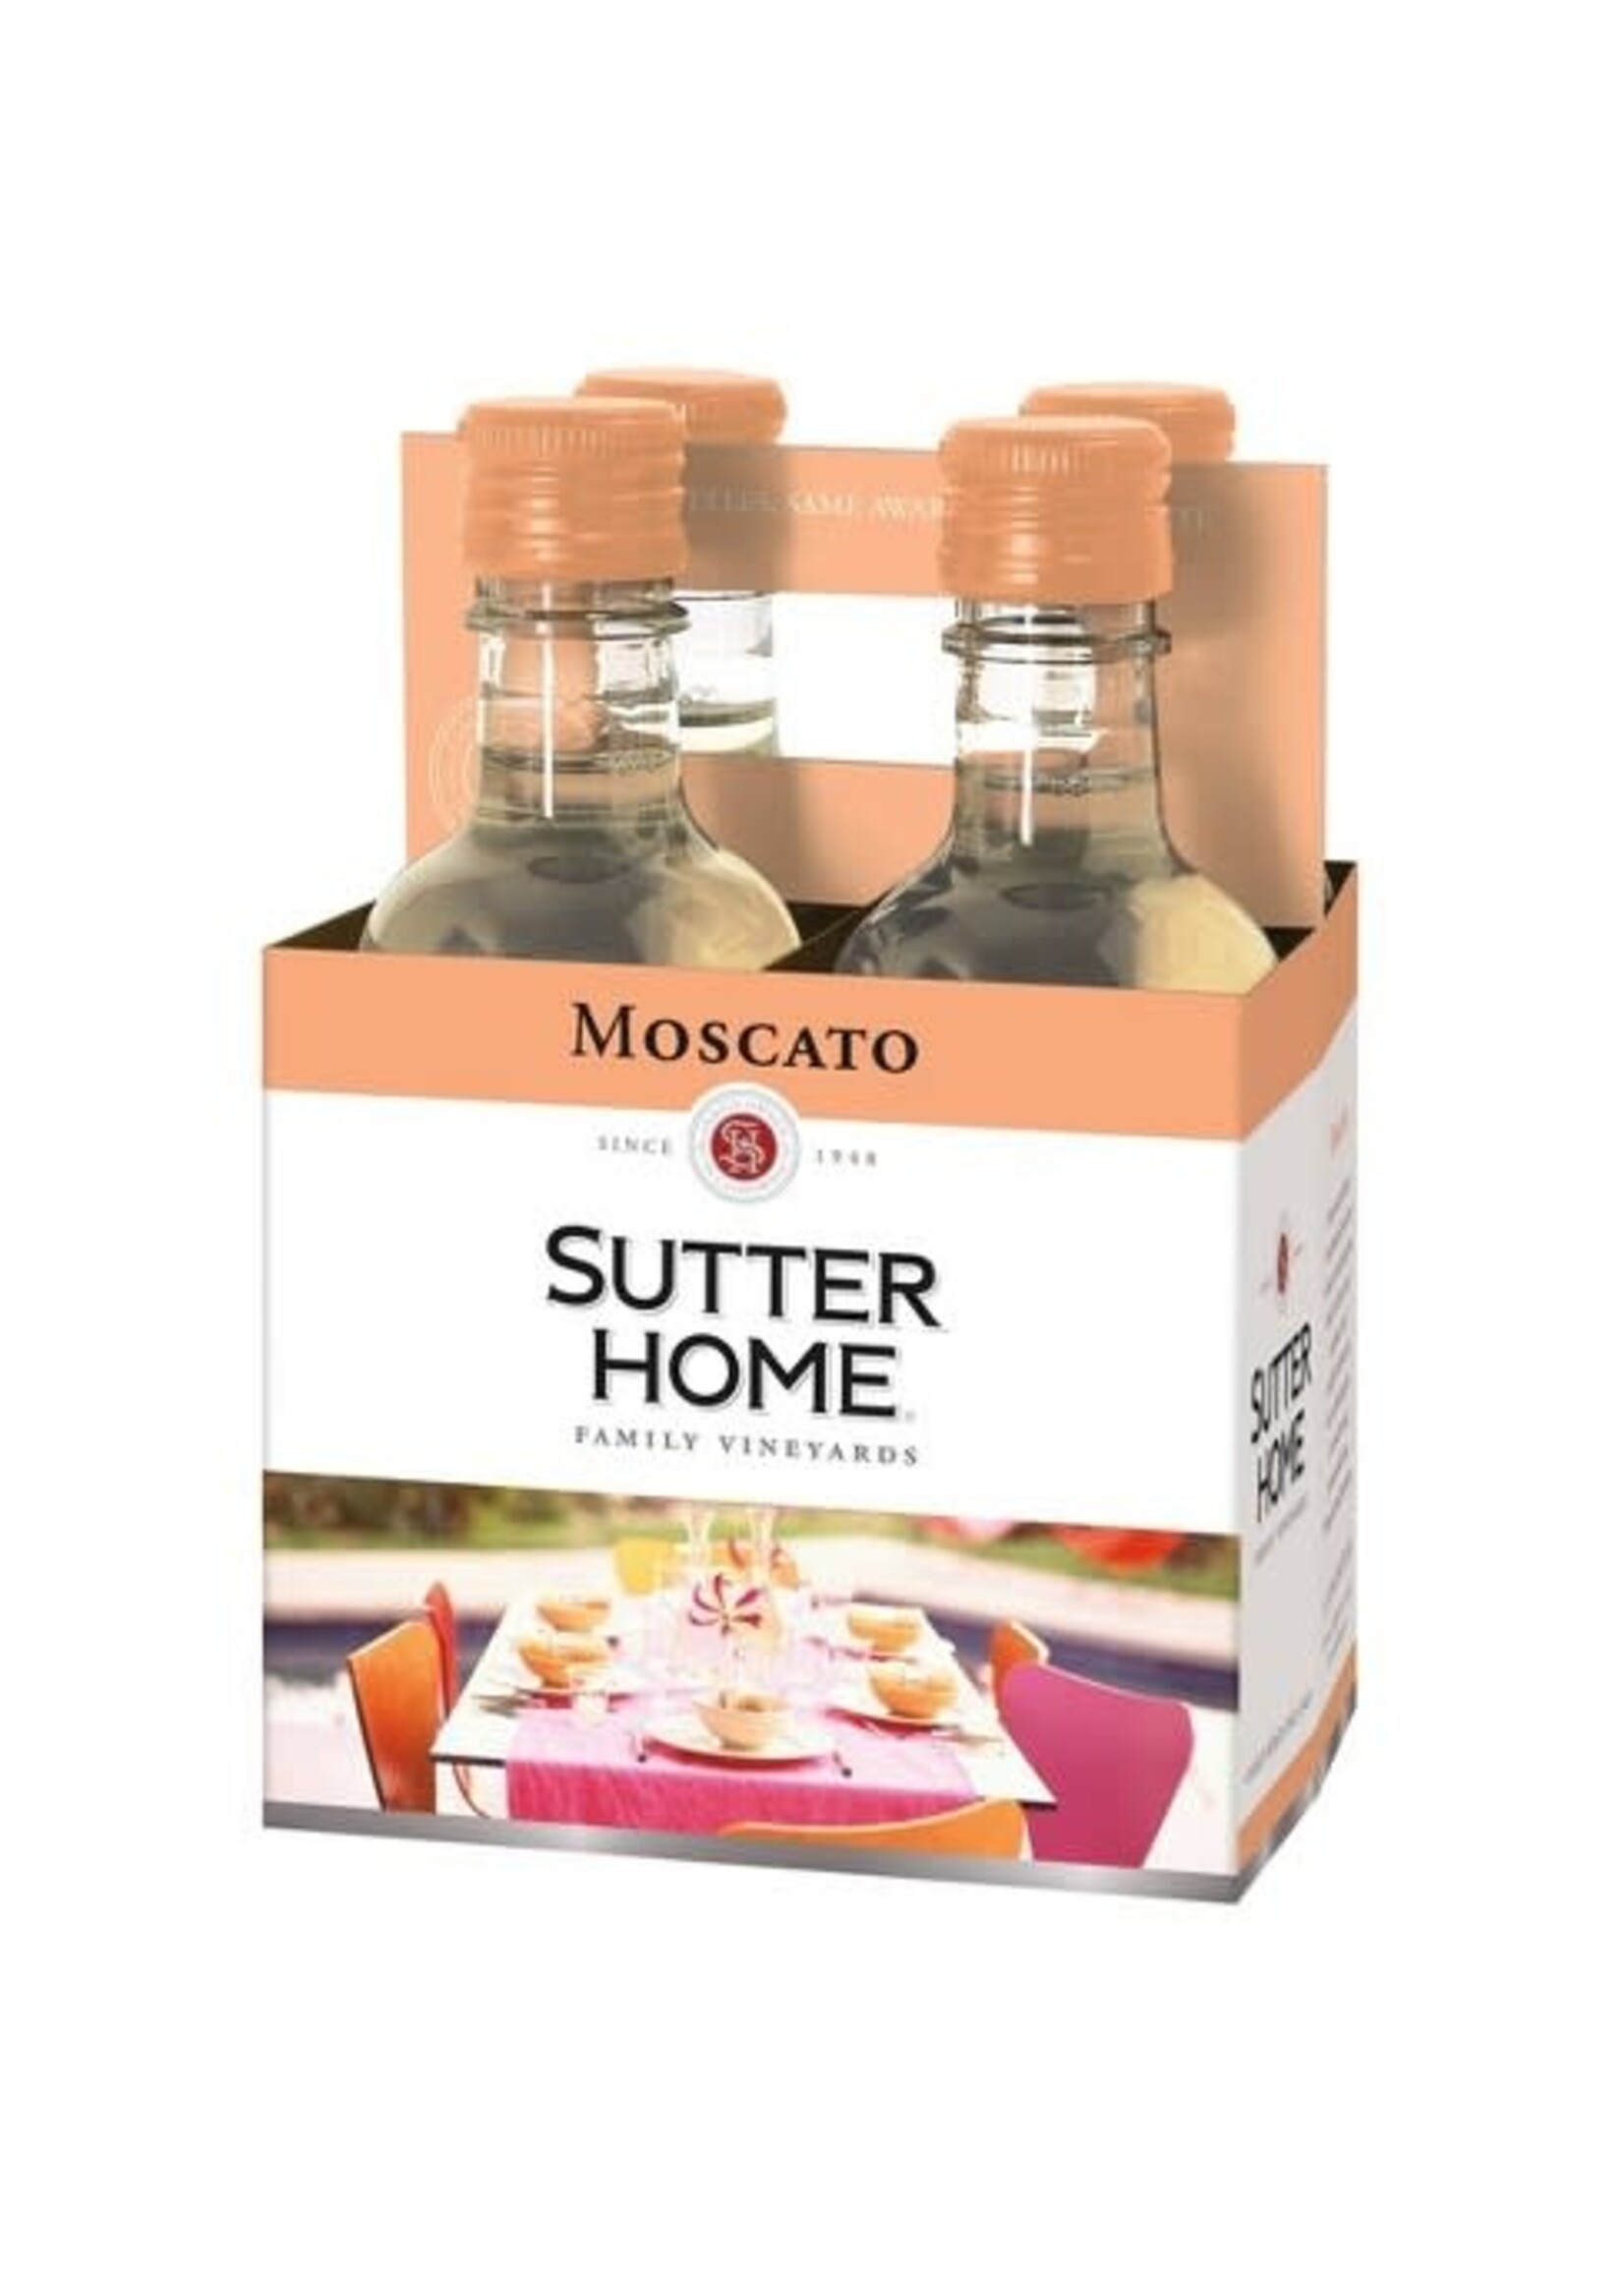 SUTTER HOME SUTTER HOME	MOSCATO	.187L 4PK